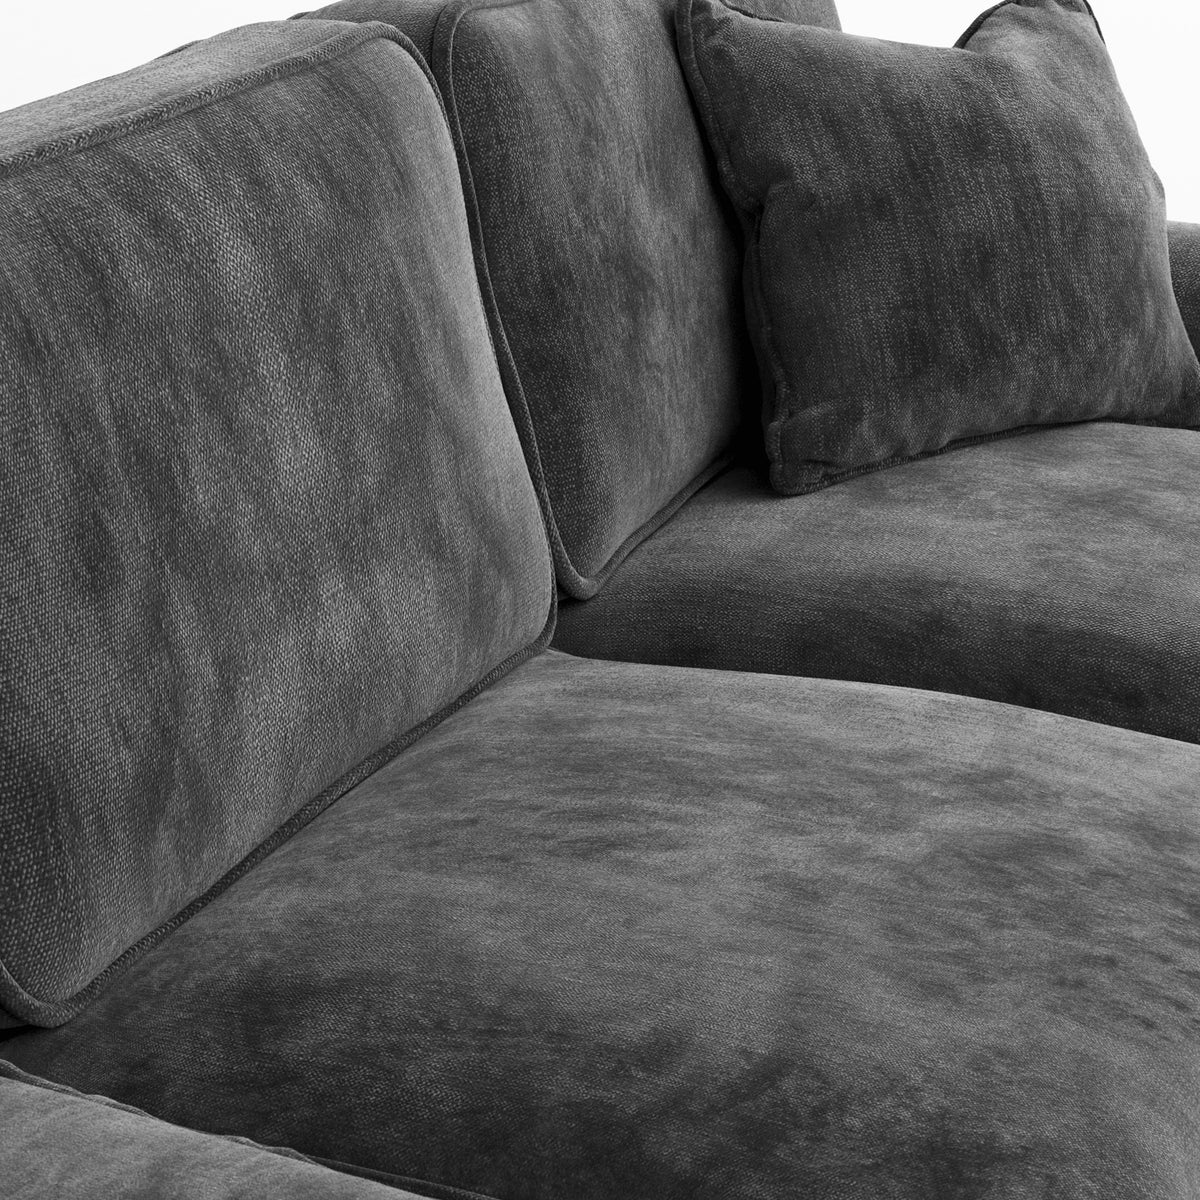 Alfie Charcoal 4 Seater Sofa from Roseland Furniture